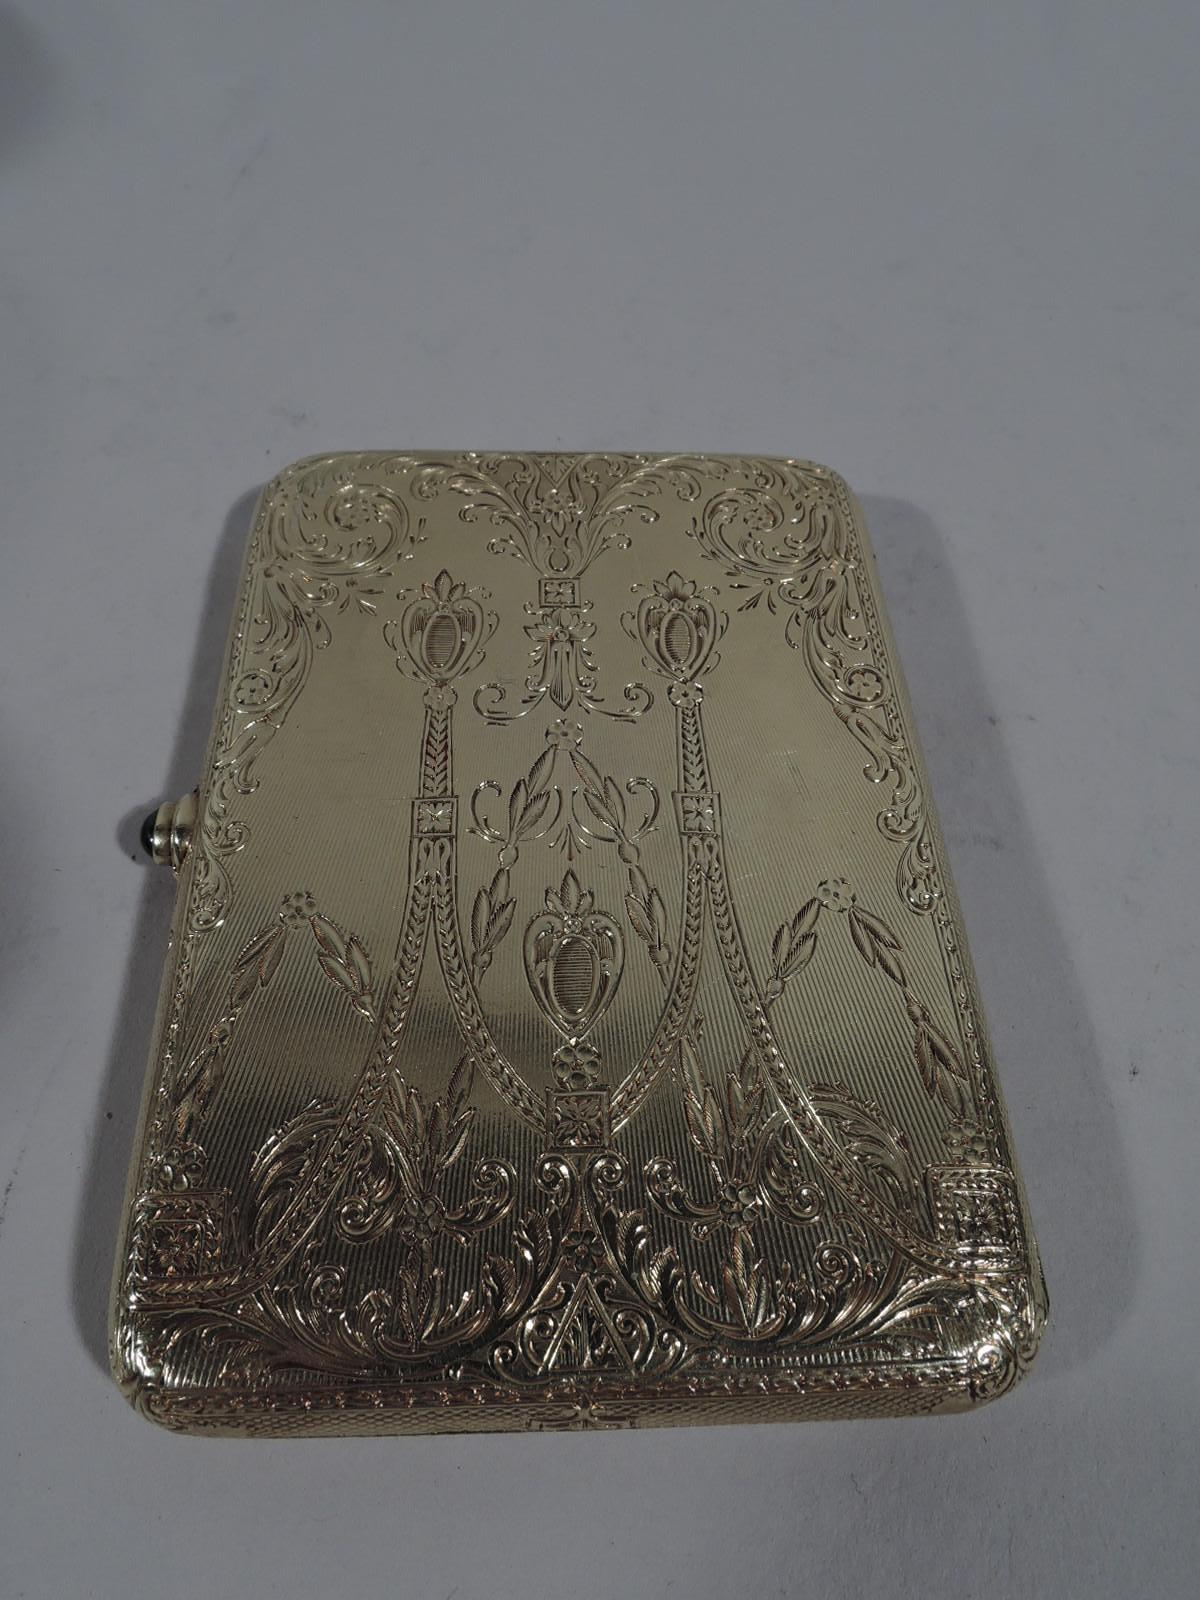 Edwardian 14k yellow gold card case, ca 1910. Rectangular and hinged. On cover are applied swags and leafing scrolls in white gold inset with diamonds and sapphires. On back is engraved same pattern. Very sumptuous and very select. For the exclusive